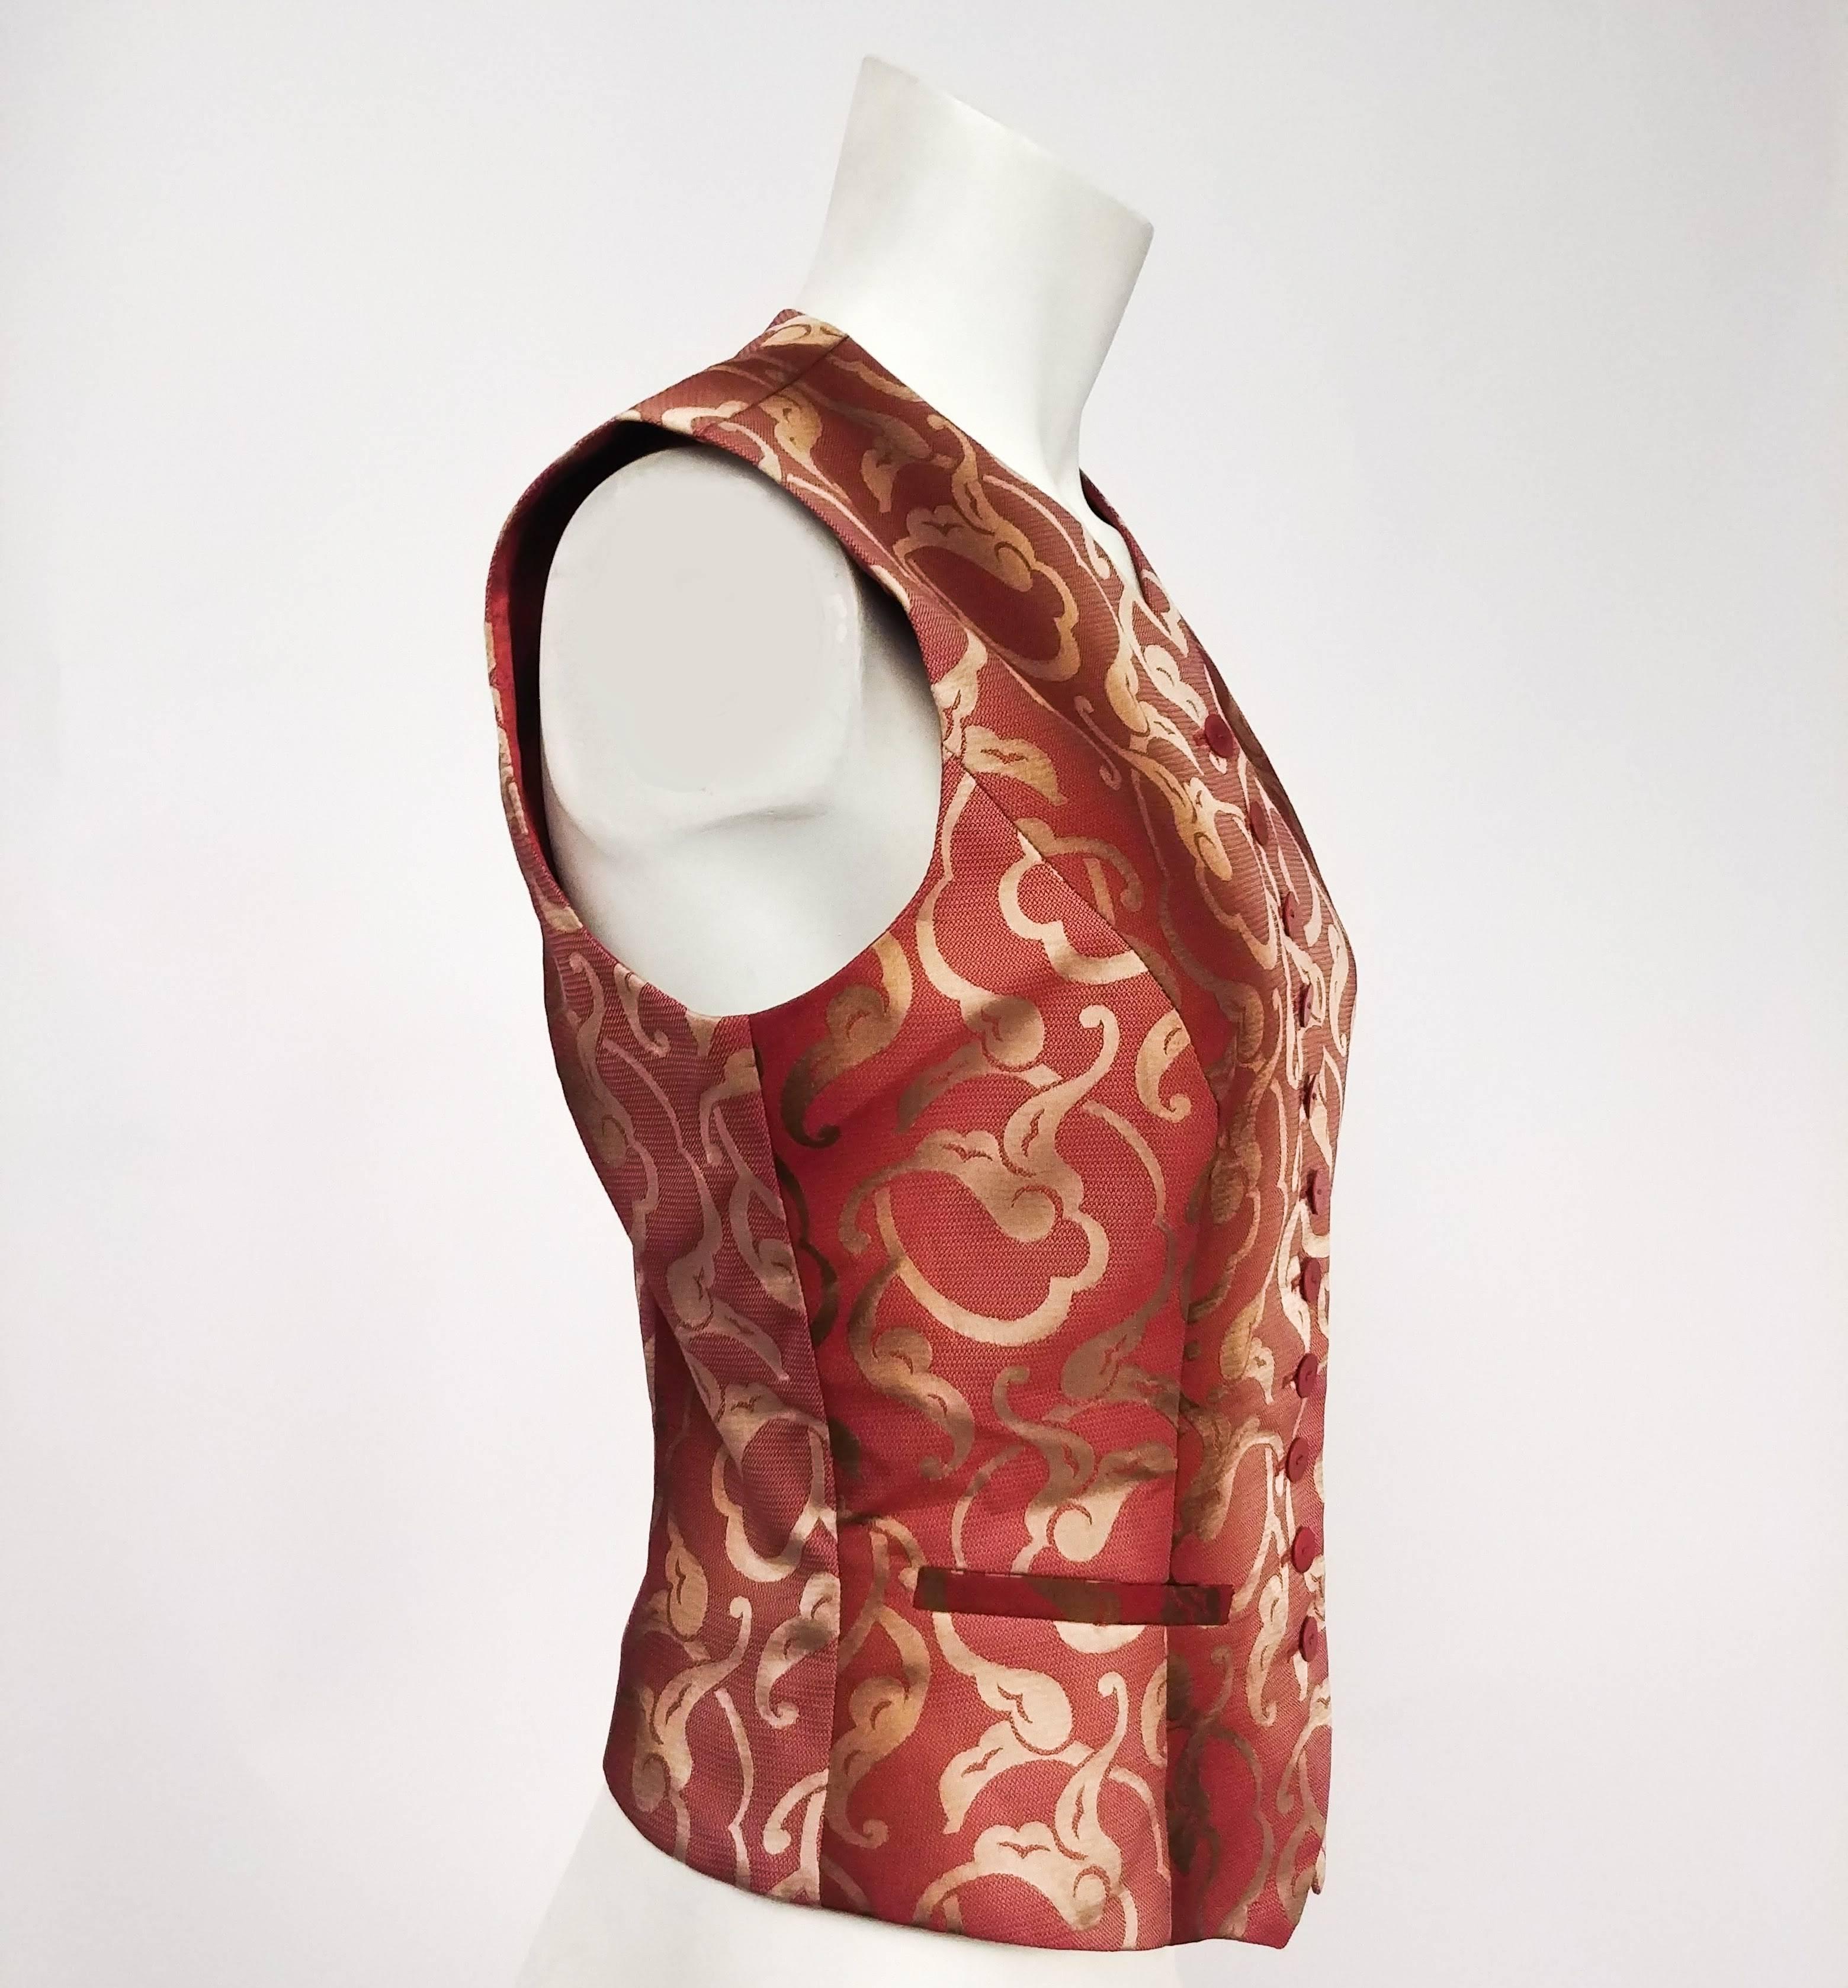 Kenzo Baroque Style Brocade Vest. Elegant red and gold colors with swirling design. Welt pockets at front. Iridescent lining. 